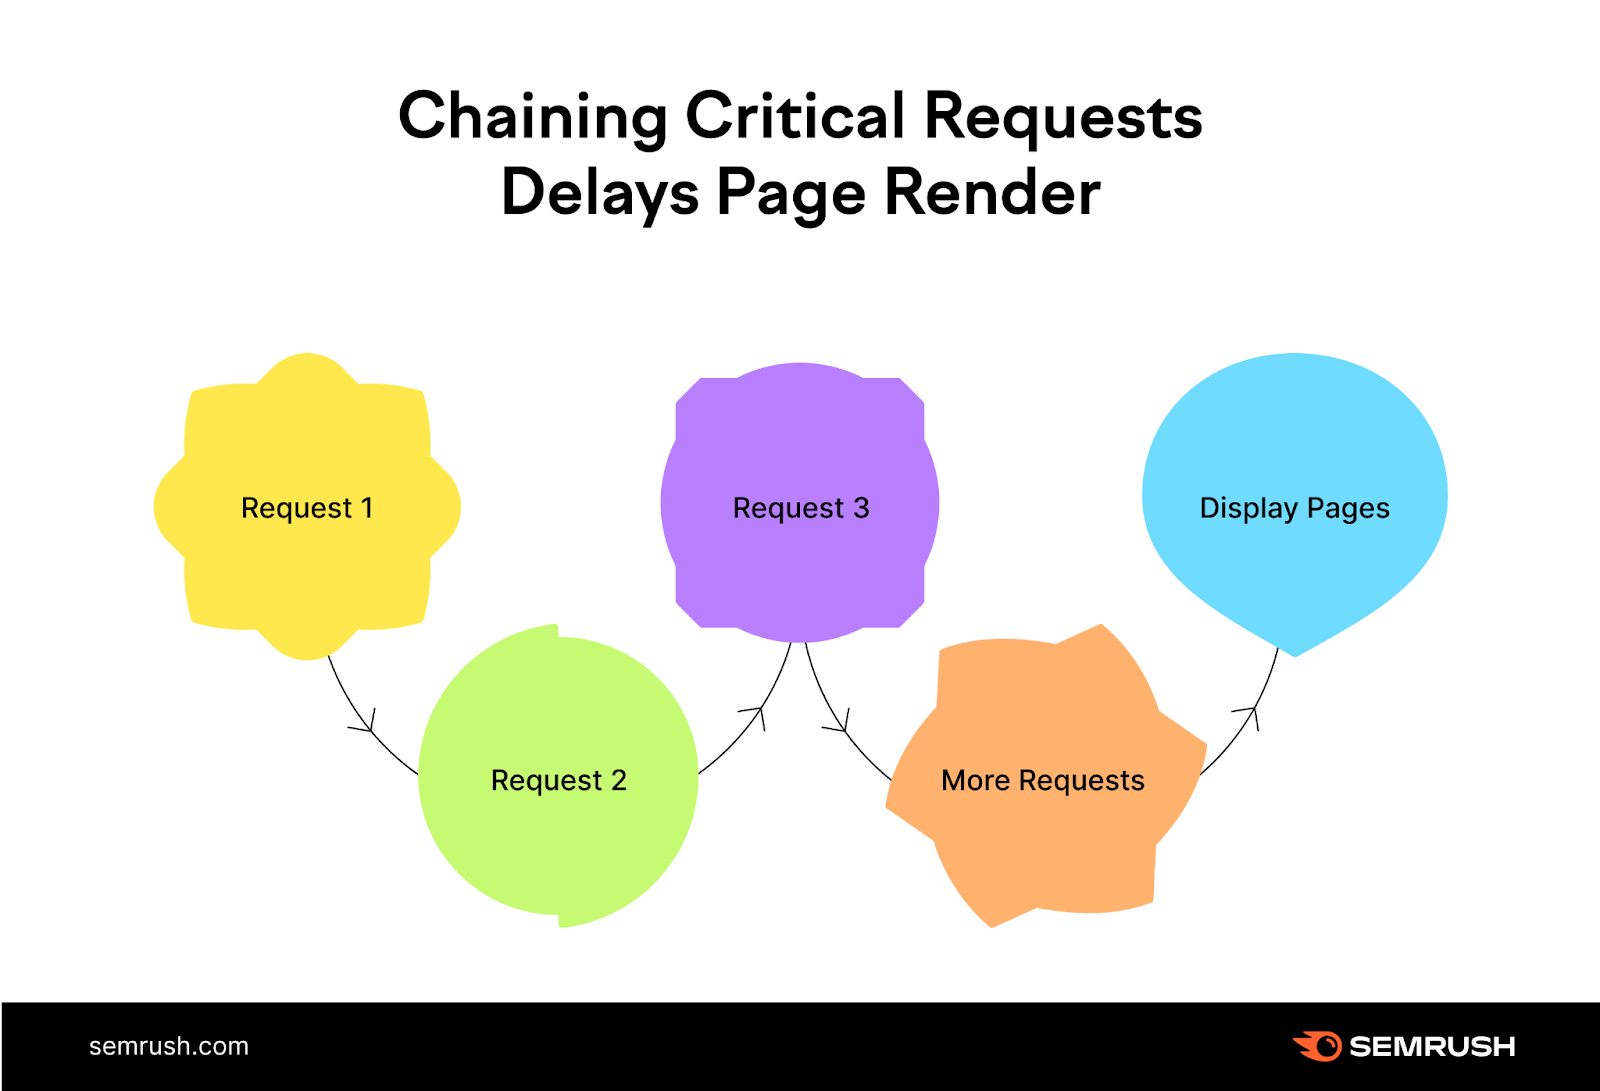 How chaining critical requests delays page rendering, with requests labeled 1 to 3, more requests, and display pages.